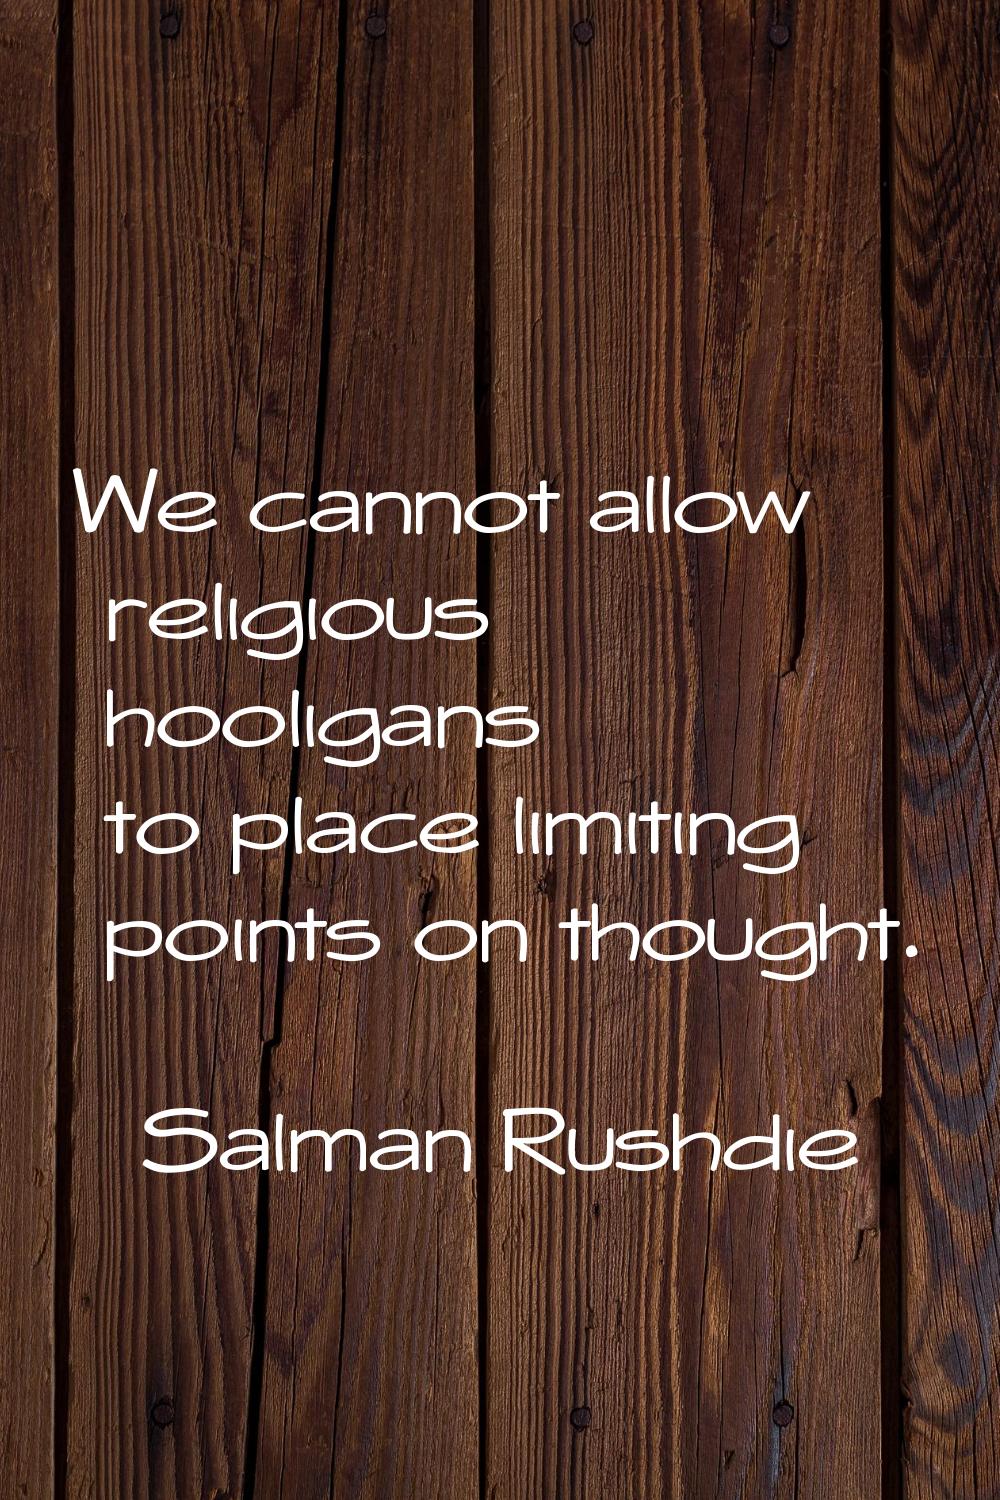 We cannot allow religious hooligans to place limiting points on thought.